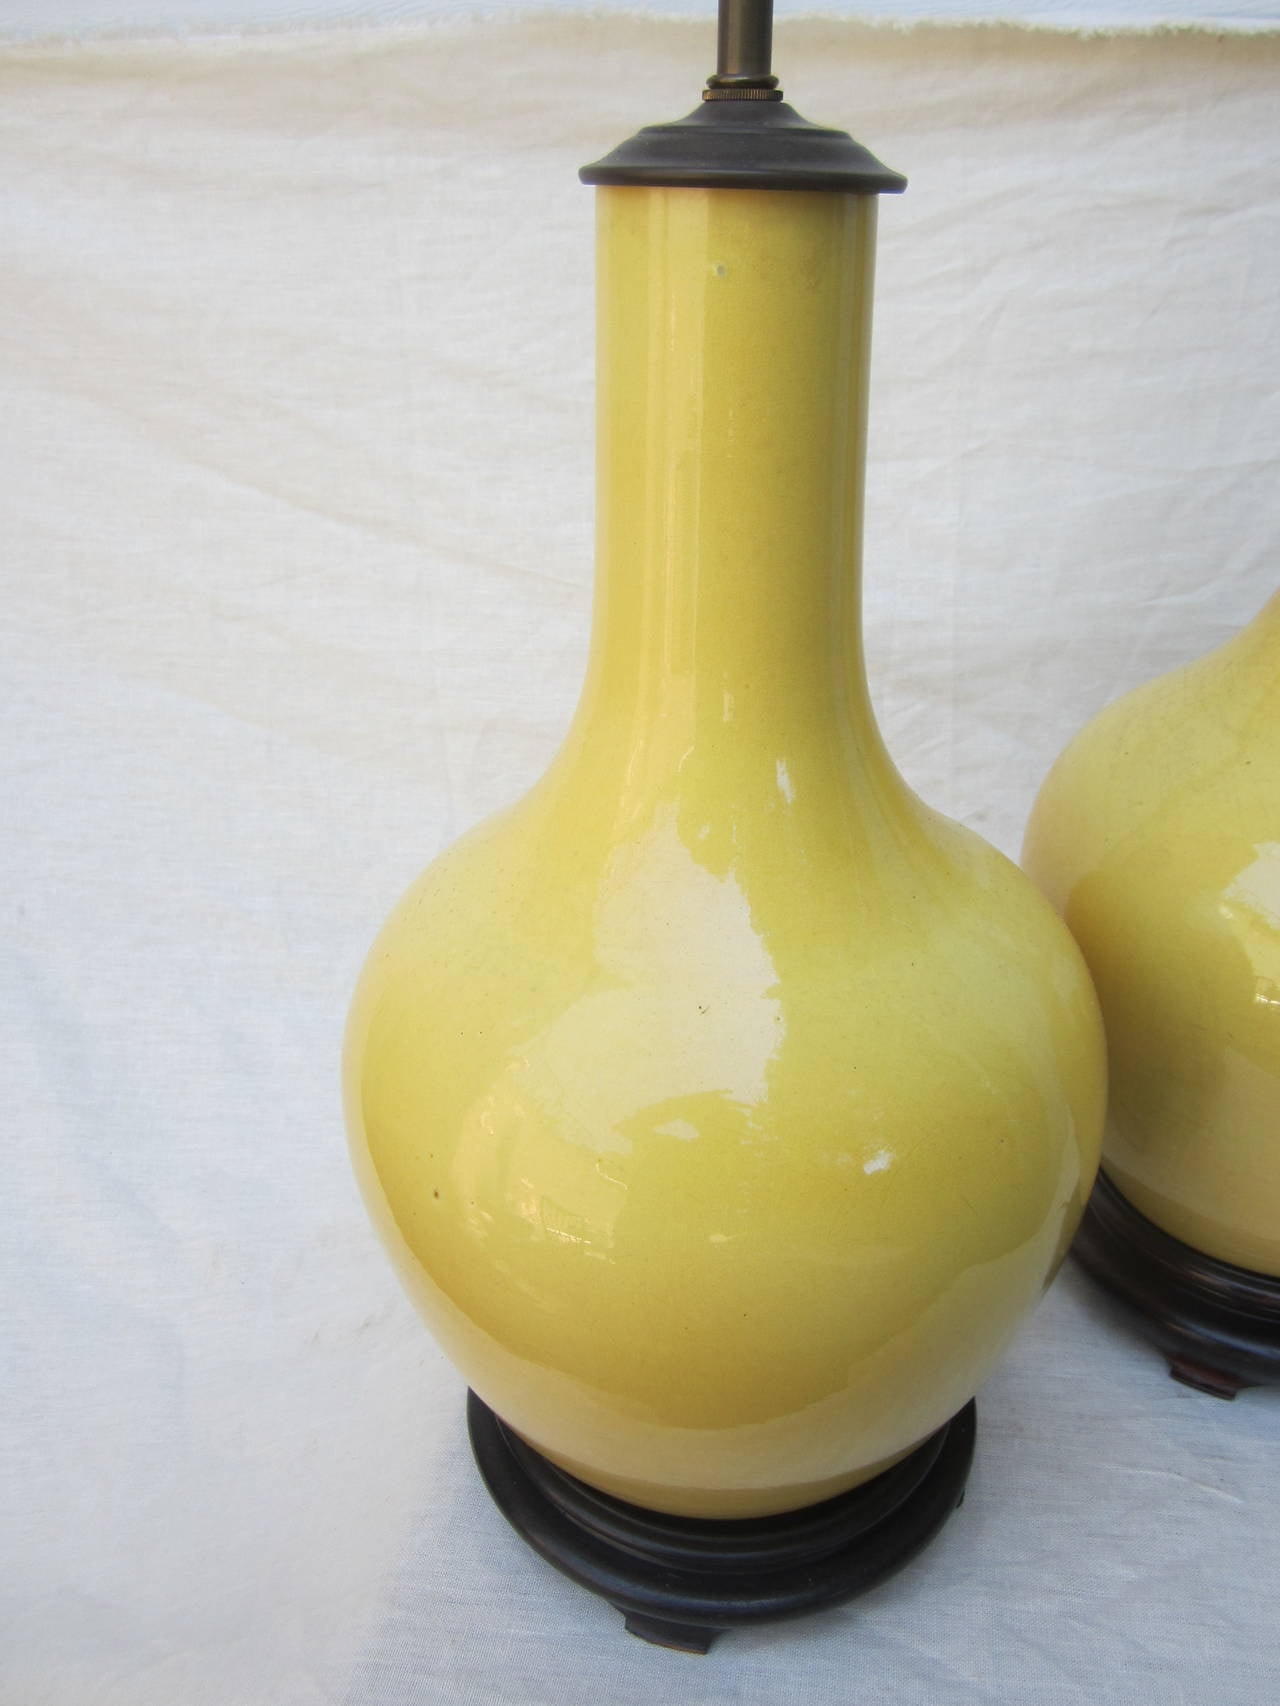 Beautiful pair of Imperial yellow ceramic lamps.....Chinese 19th century.....later wired in mid 20th century